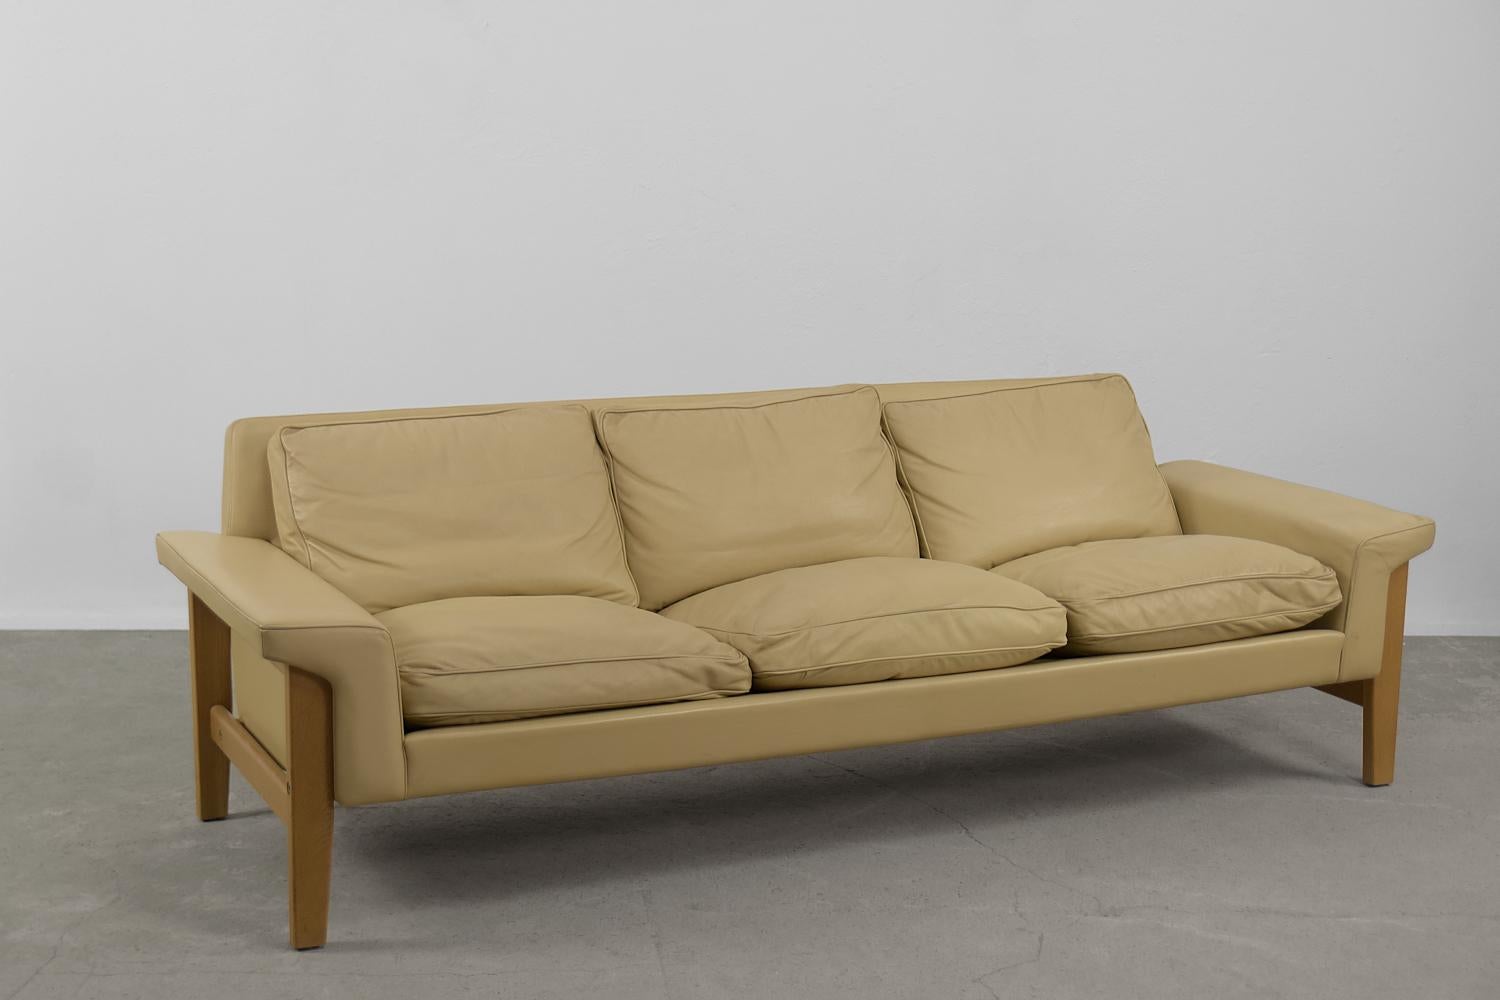 This elegant three-seater leather sofa was designed by Lennart Bender and produced by the Swedish Ulferts Tibro during the 1960s. The frame is made of solid oak wood. The sofa was finished with natural leather in a wheat shade. The soft, loose seat